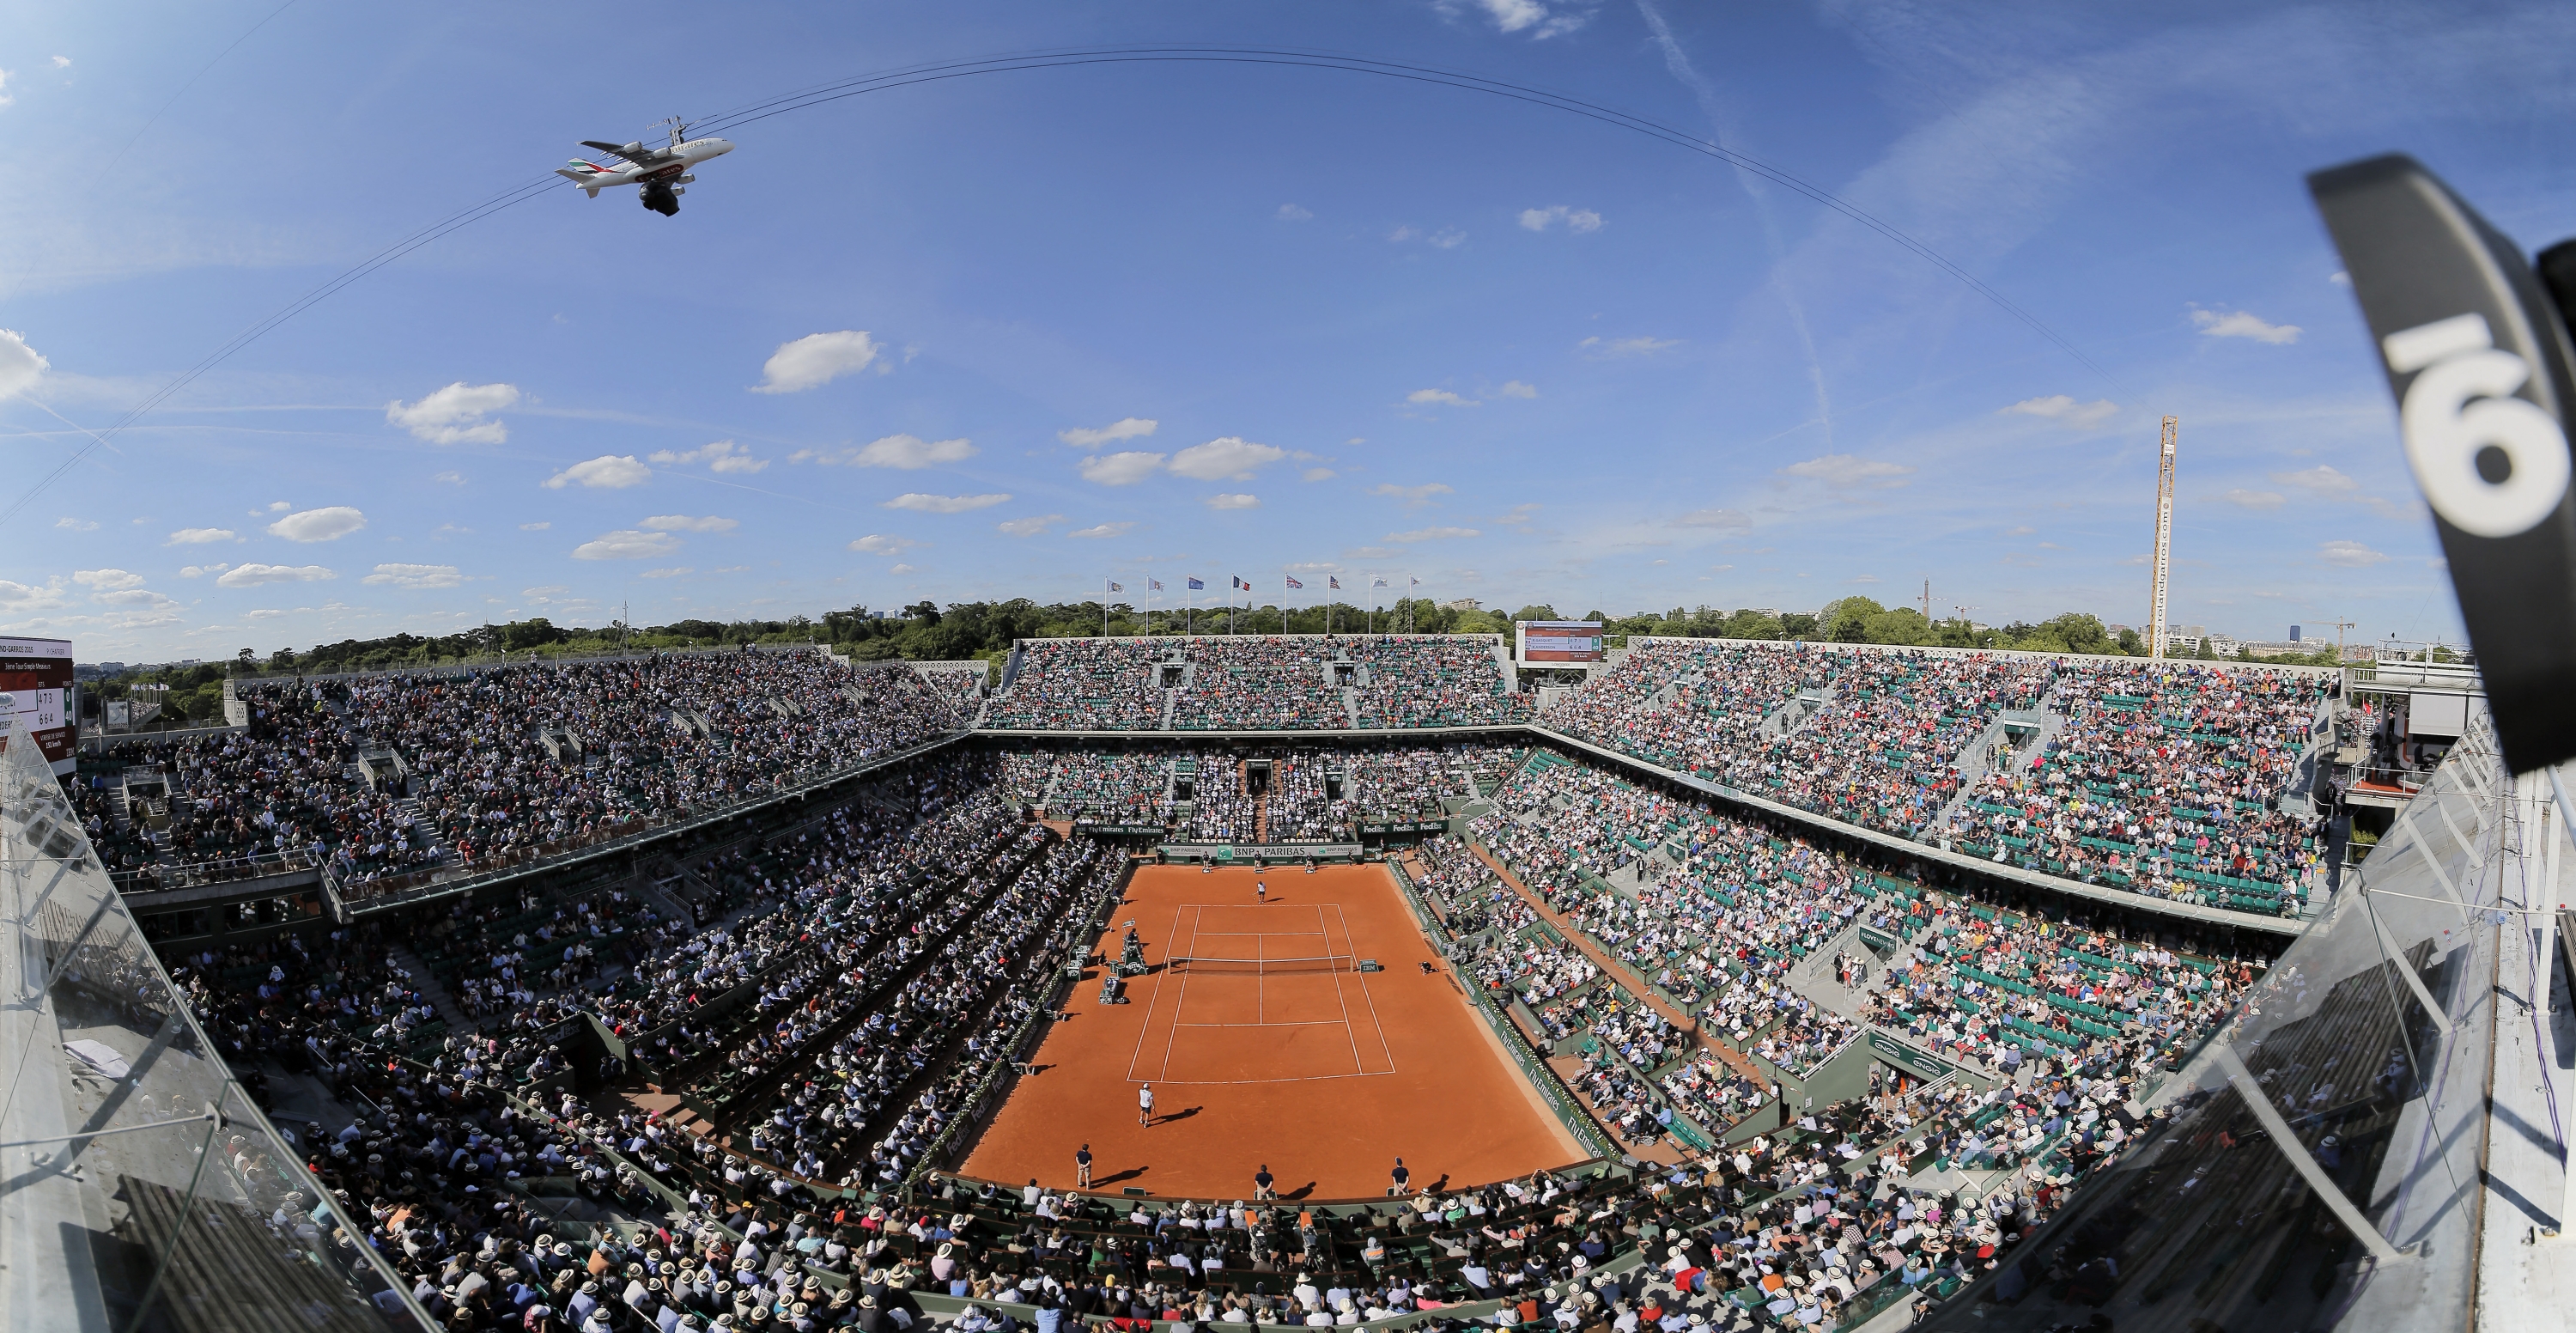 Philippe Chatrier panoramic view from the top during the of French Tennis Open at the Roland Garros stadium in Paris, France, on May 21 to June 7, 2015. Photo Stephane ALLAMAN / DPPI (Photo by STEPHANE ALLAMAN / Stéphane ALLAMAN / DPPI via AFP)